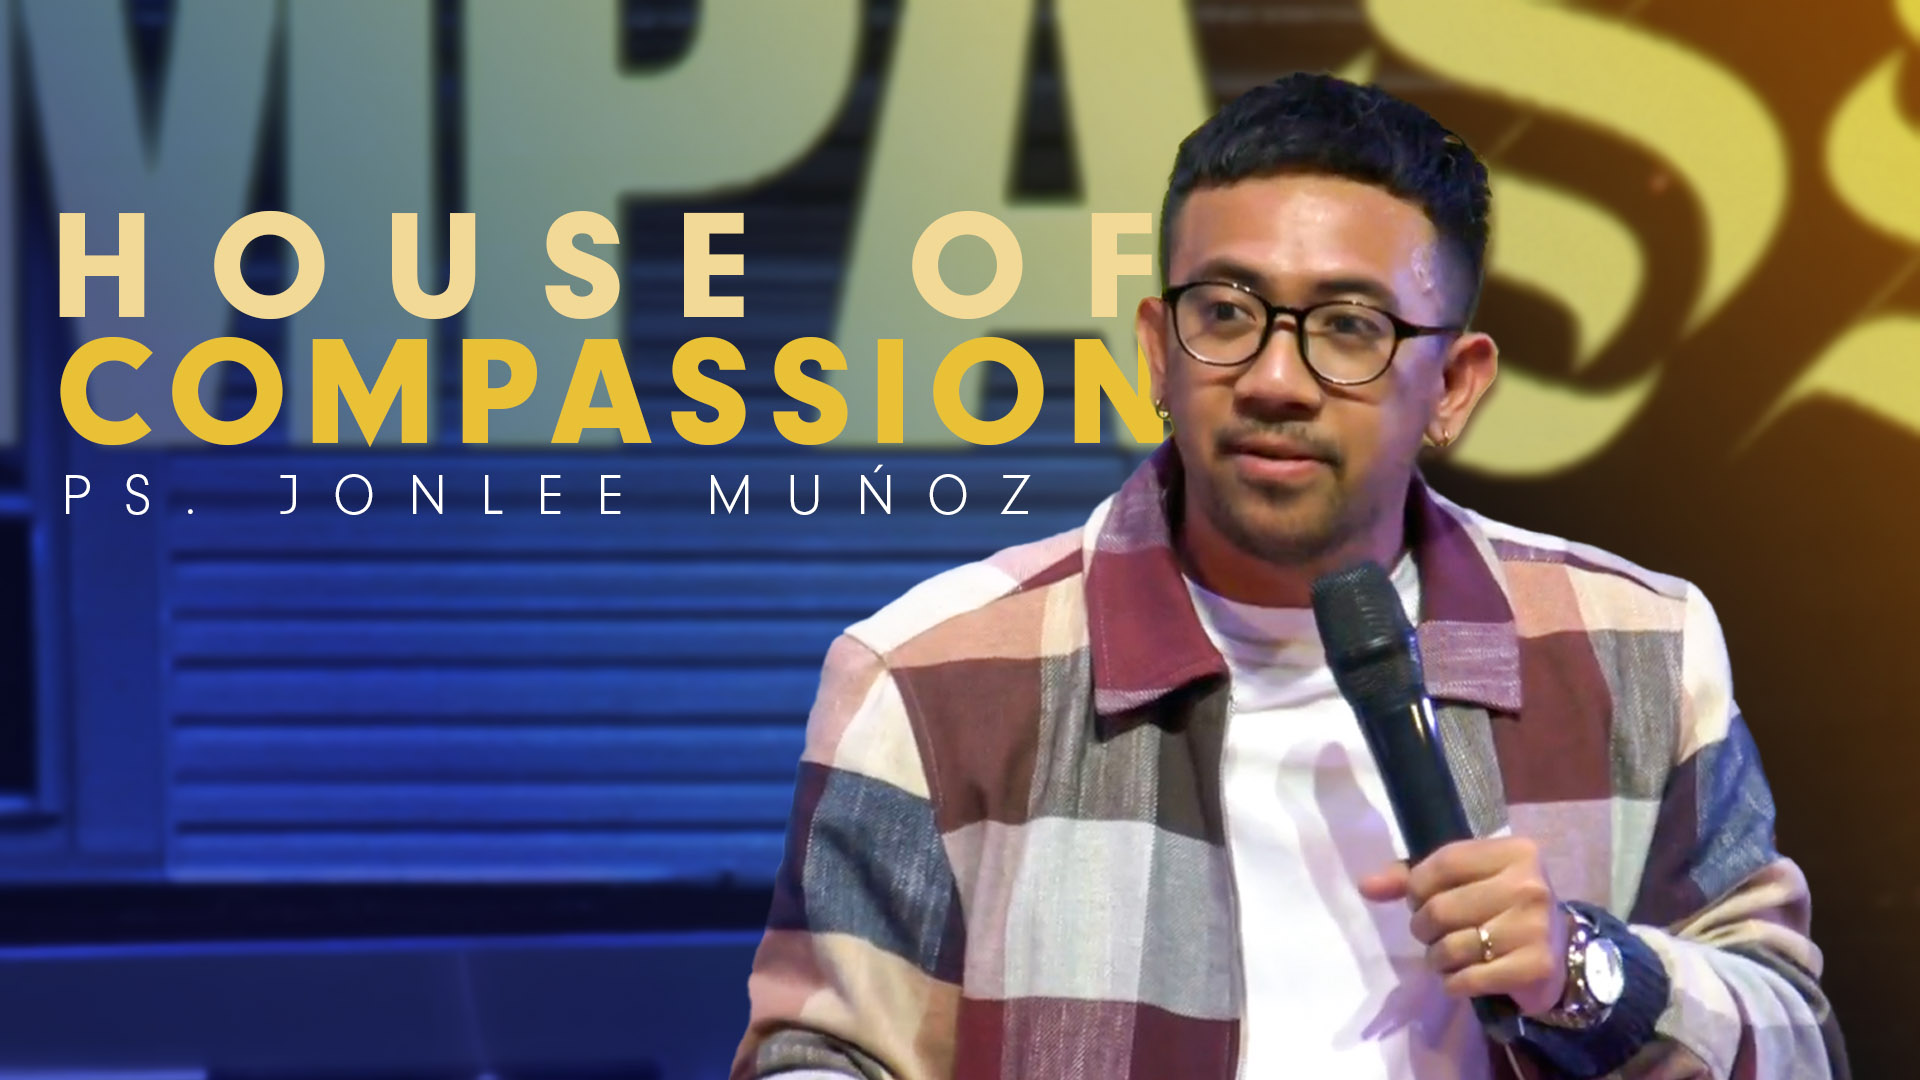 HOUSE OF COMPASSION